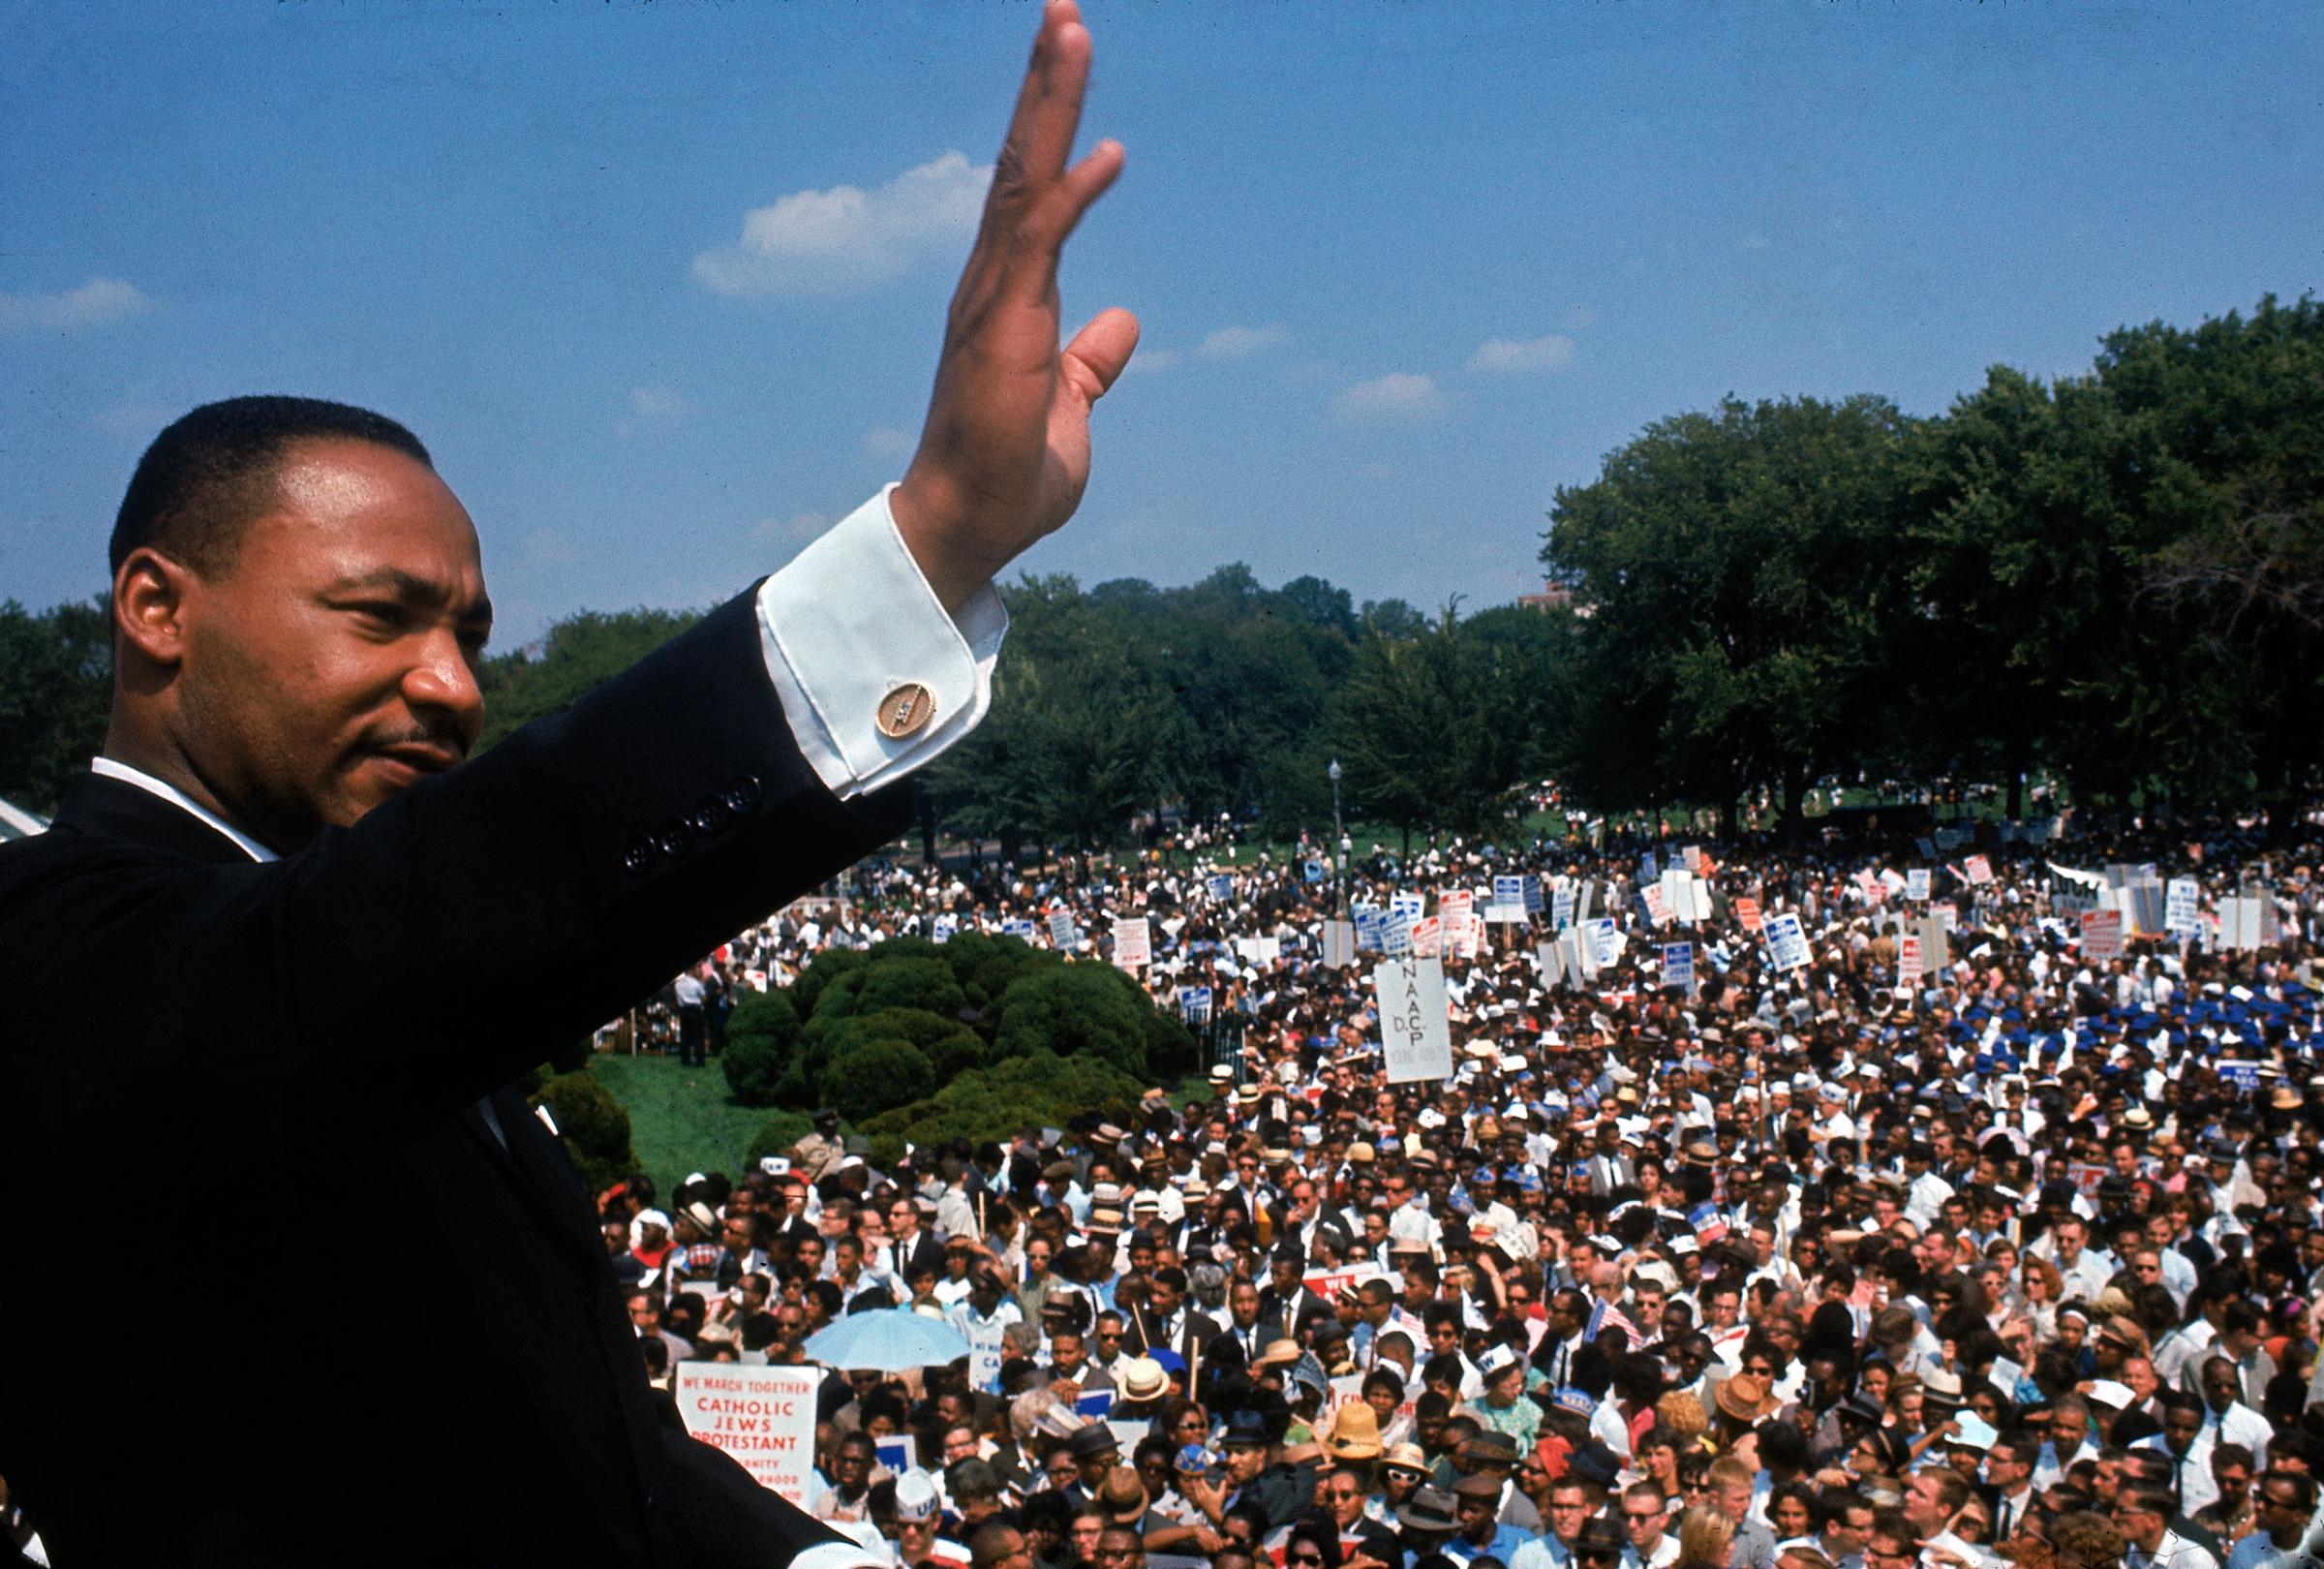 Martin Luther King Jr. addresses the crowd during the March on Washington for Jobs and Freedom, August 28, 1963.